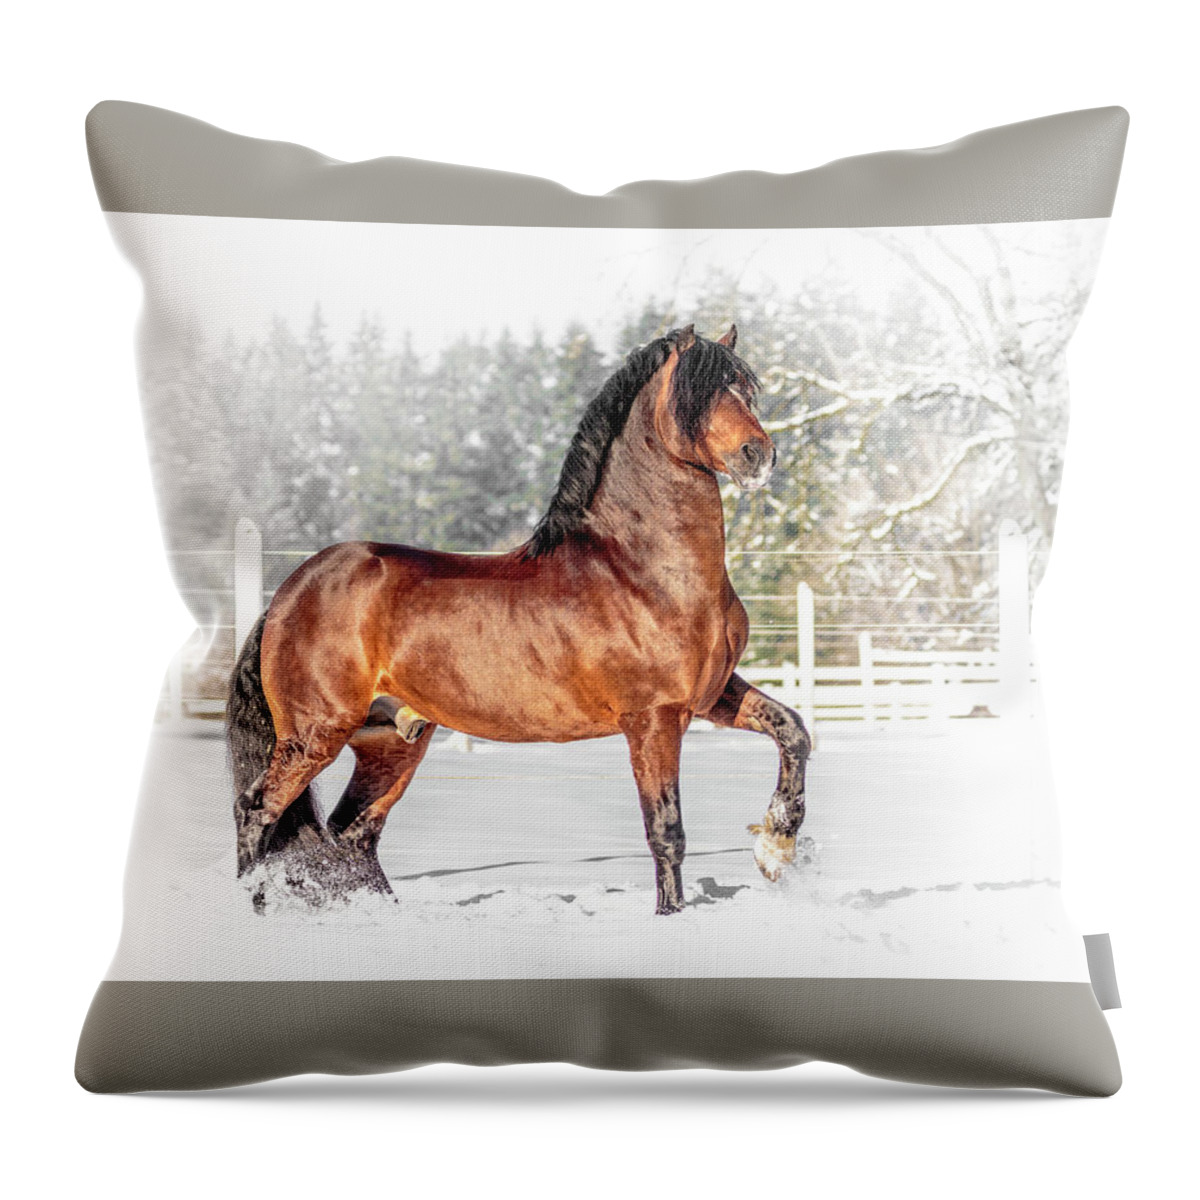 Proud Beauty Throw Pillow featuring the photograph Proud Beauty by Wes and Dotty Weber